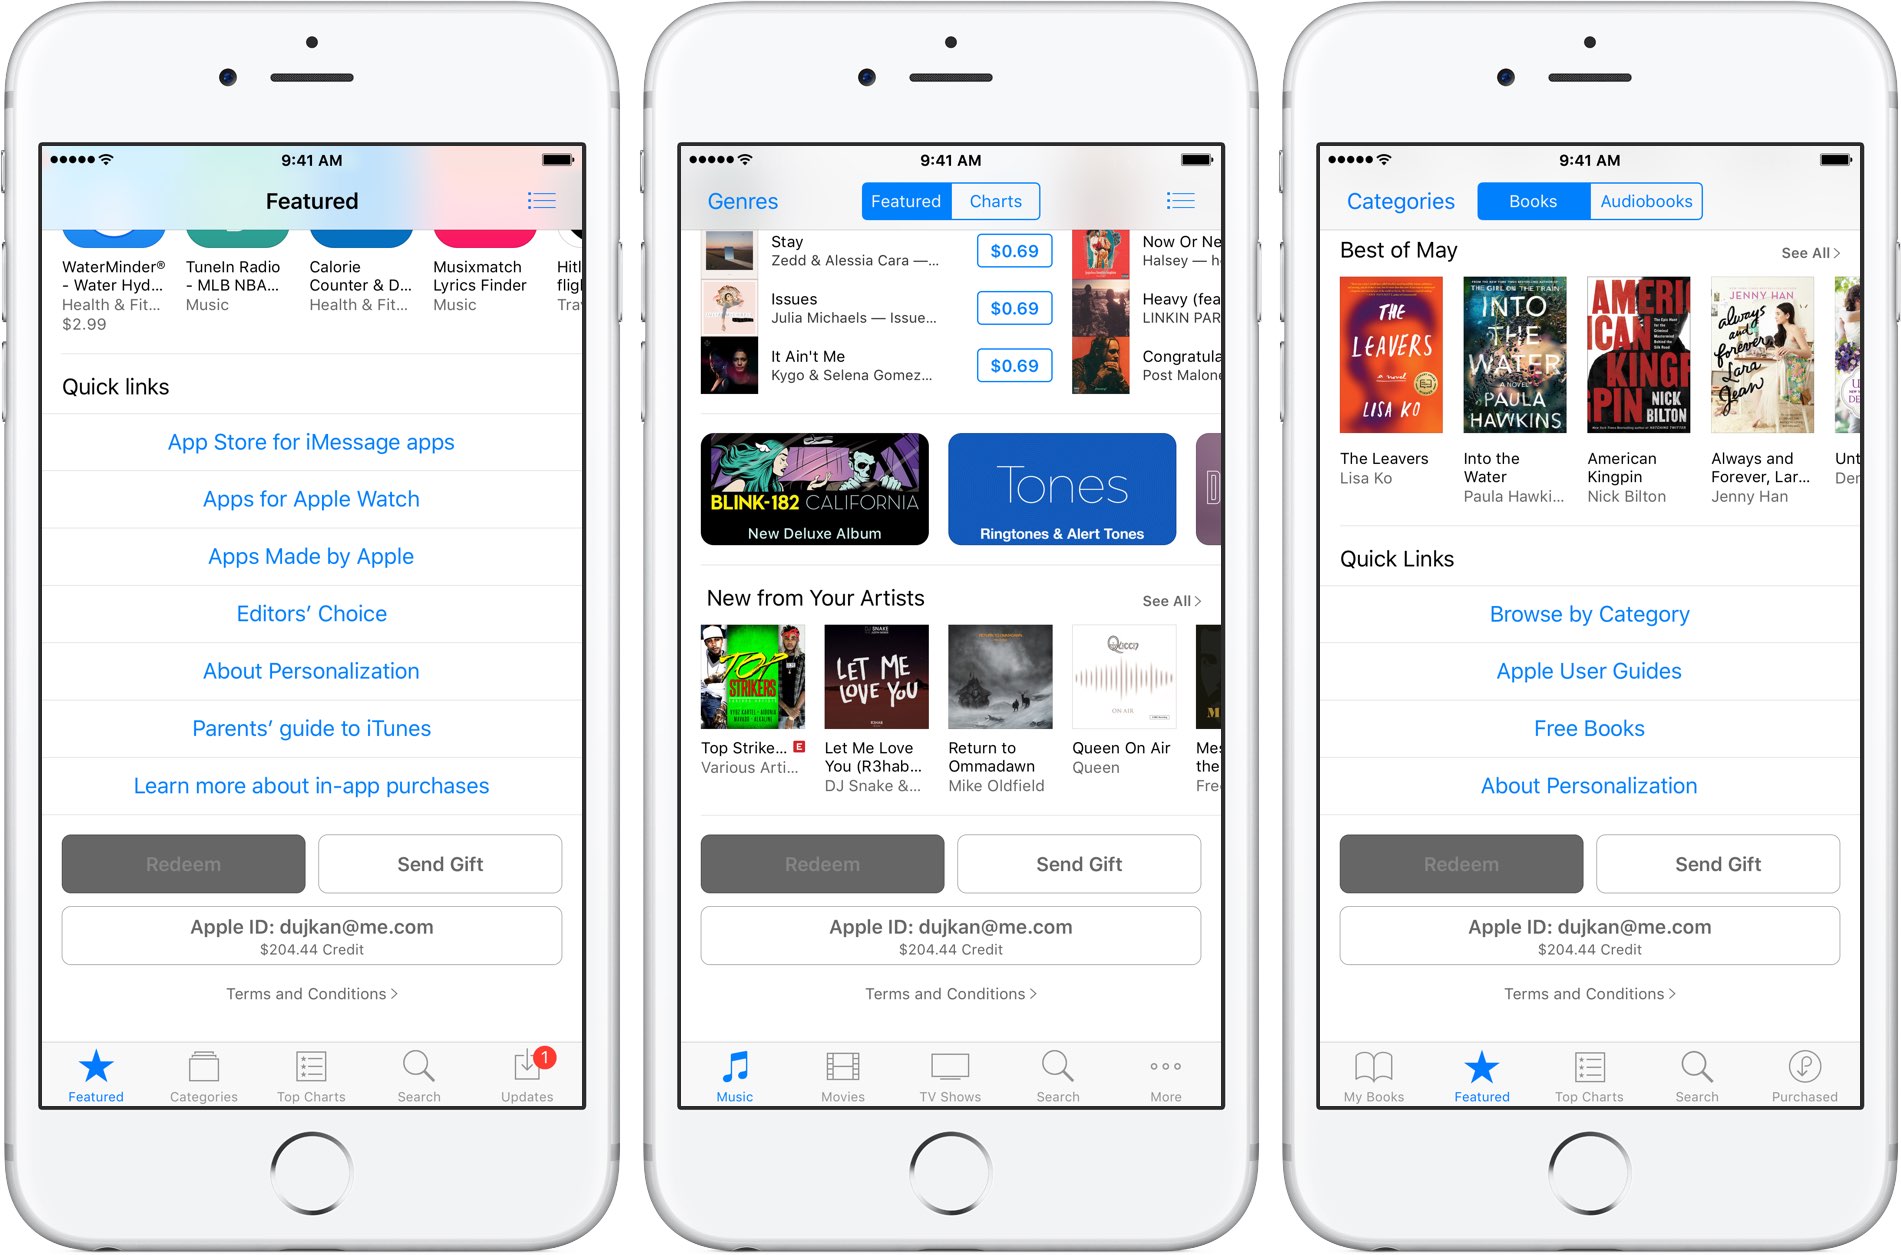 How to Add iTunes Gift Card to iPhone